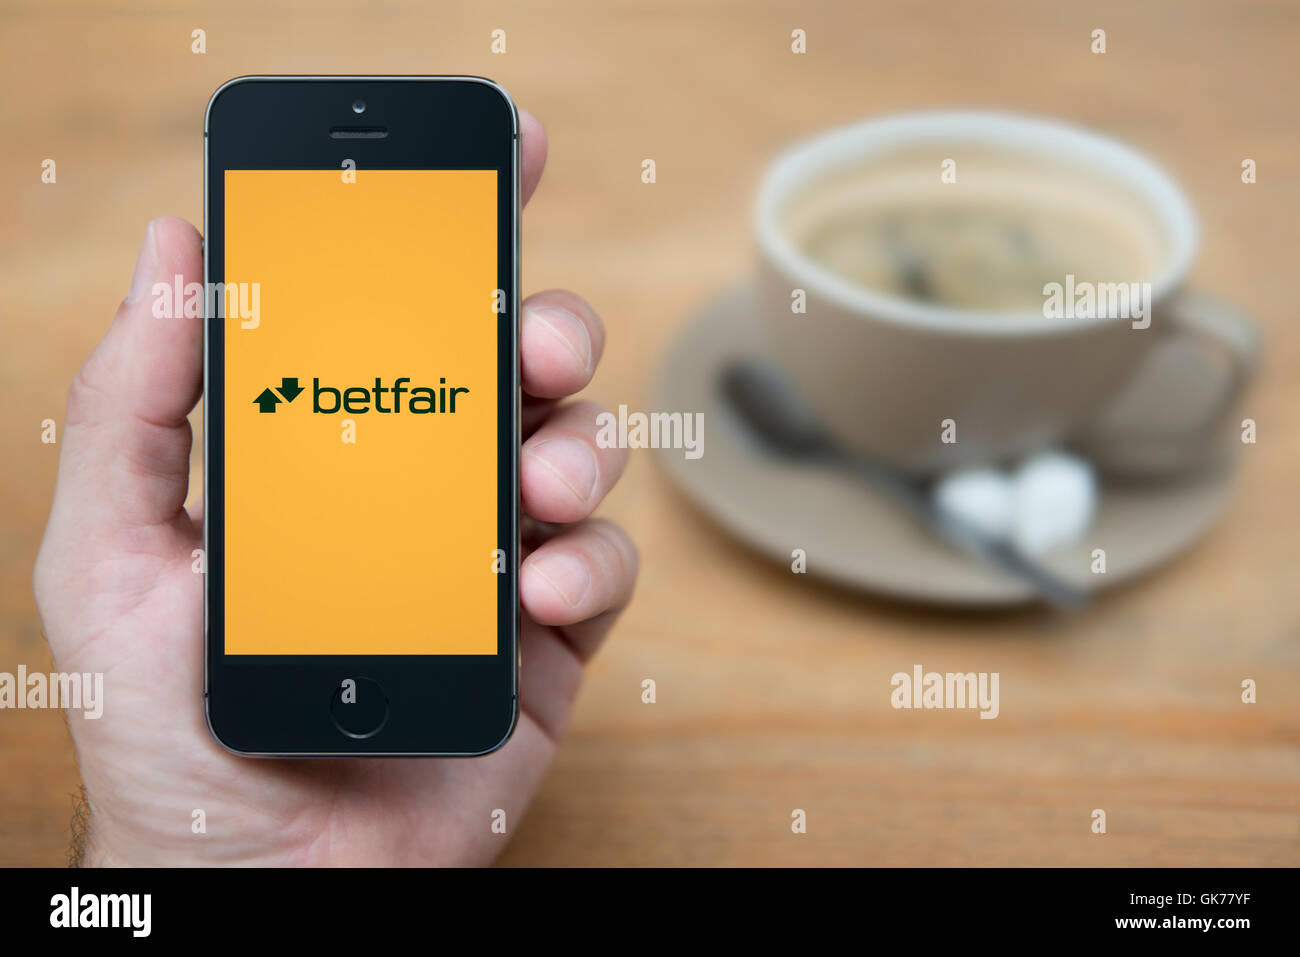 A man looks at his iPhone which displays the Betfair logo, while sat with a cup of coffee (Editorial use only). Stock Photo